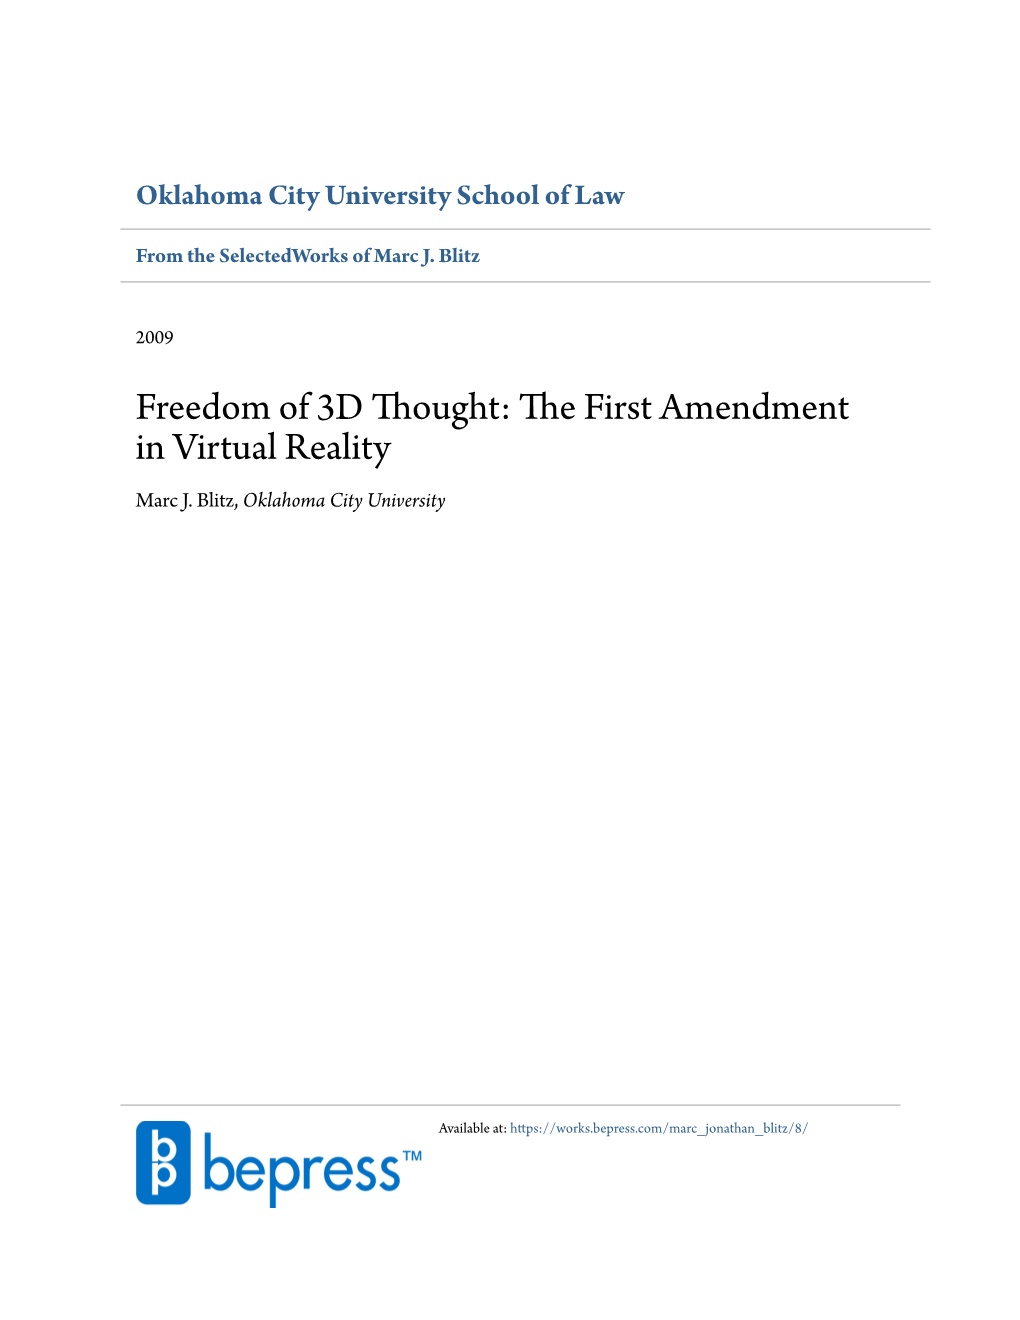 Freedom of 3D Thought: the First Amendment in Virtual Reality